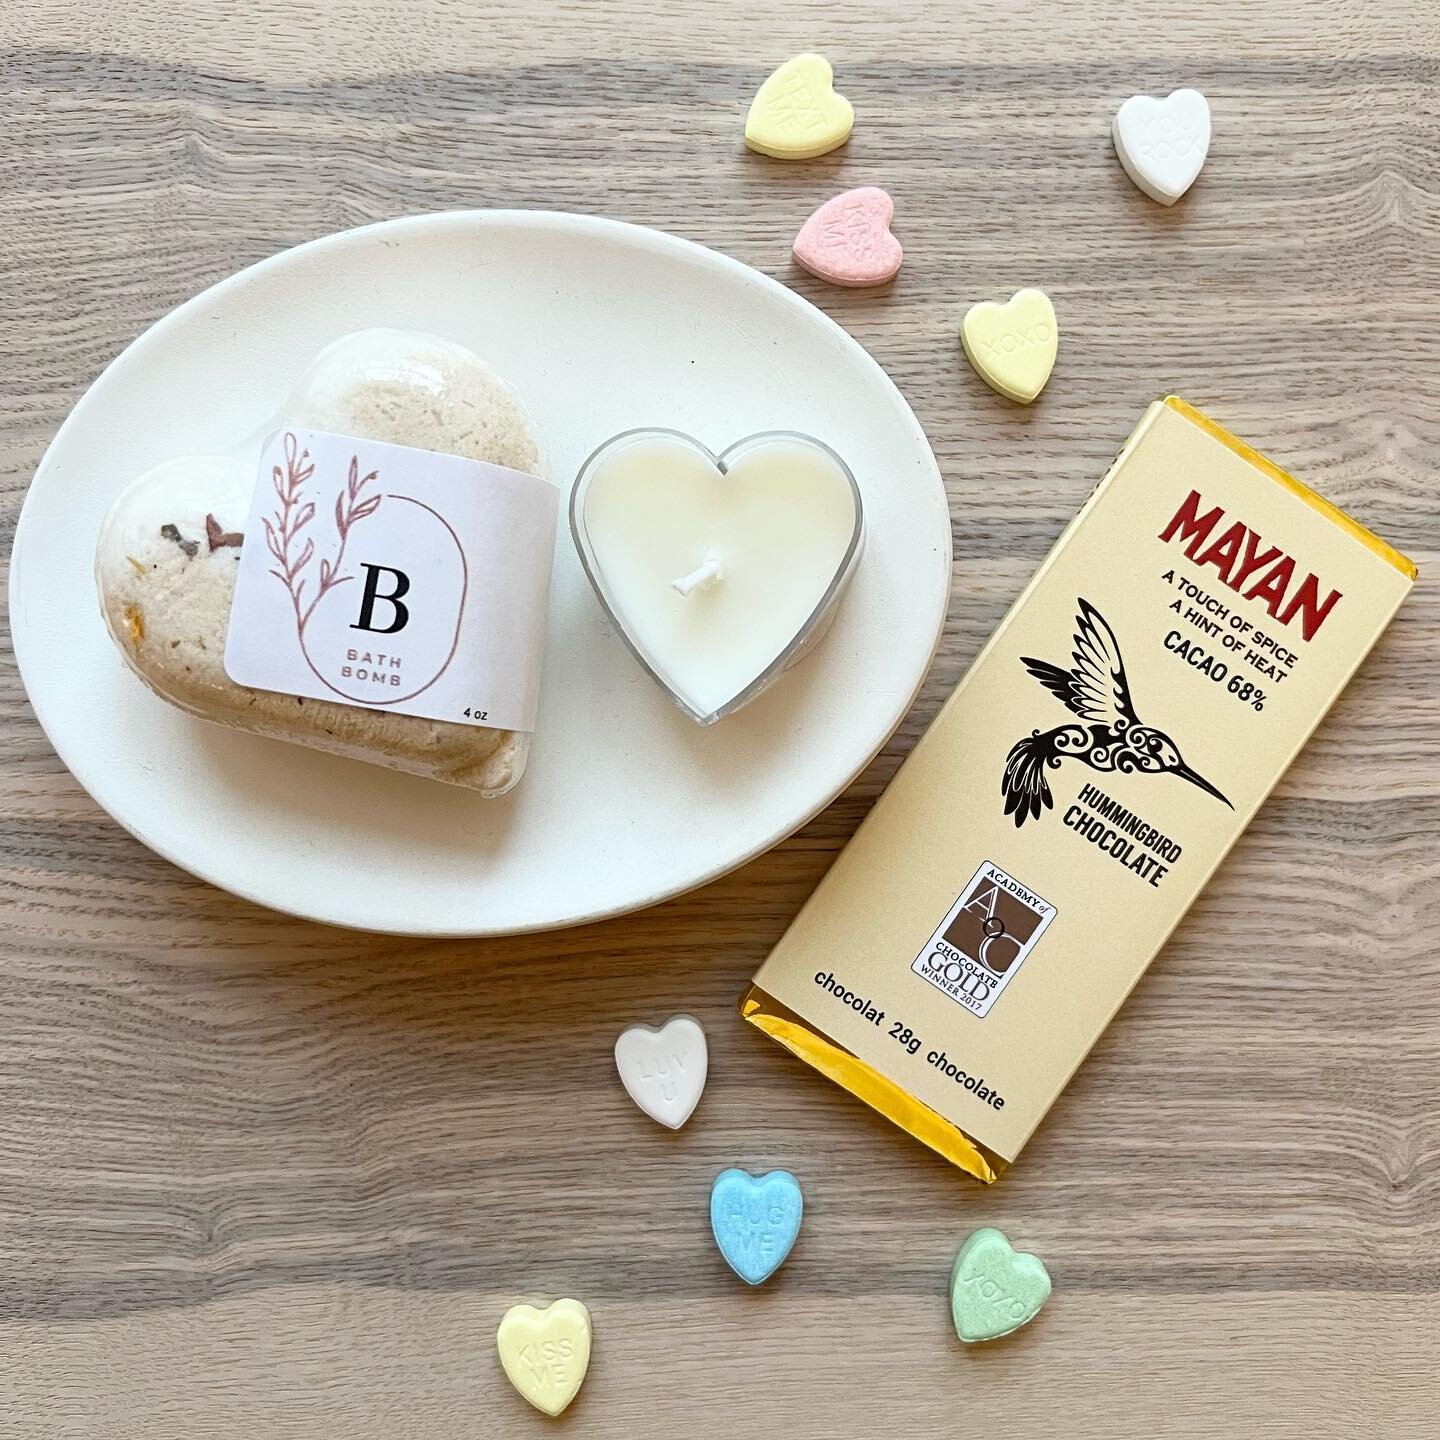 Our spa inspired candy-grams in support of the @heartinstitutefoundation are the perfect Valentines gift!  Featuring a heart shaped bath bomb by @infused_handcrafted, a heart tea light from @bohoandglow, a delicious @hummingbirdchocolate bar and a en